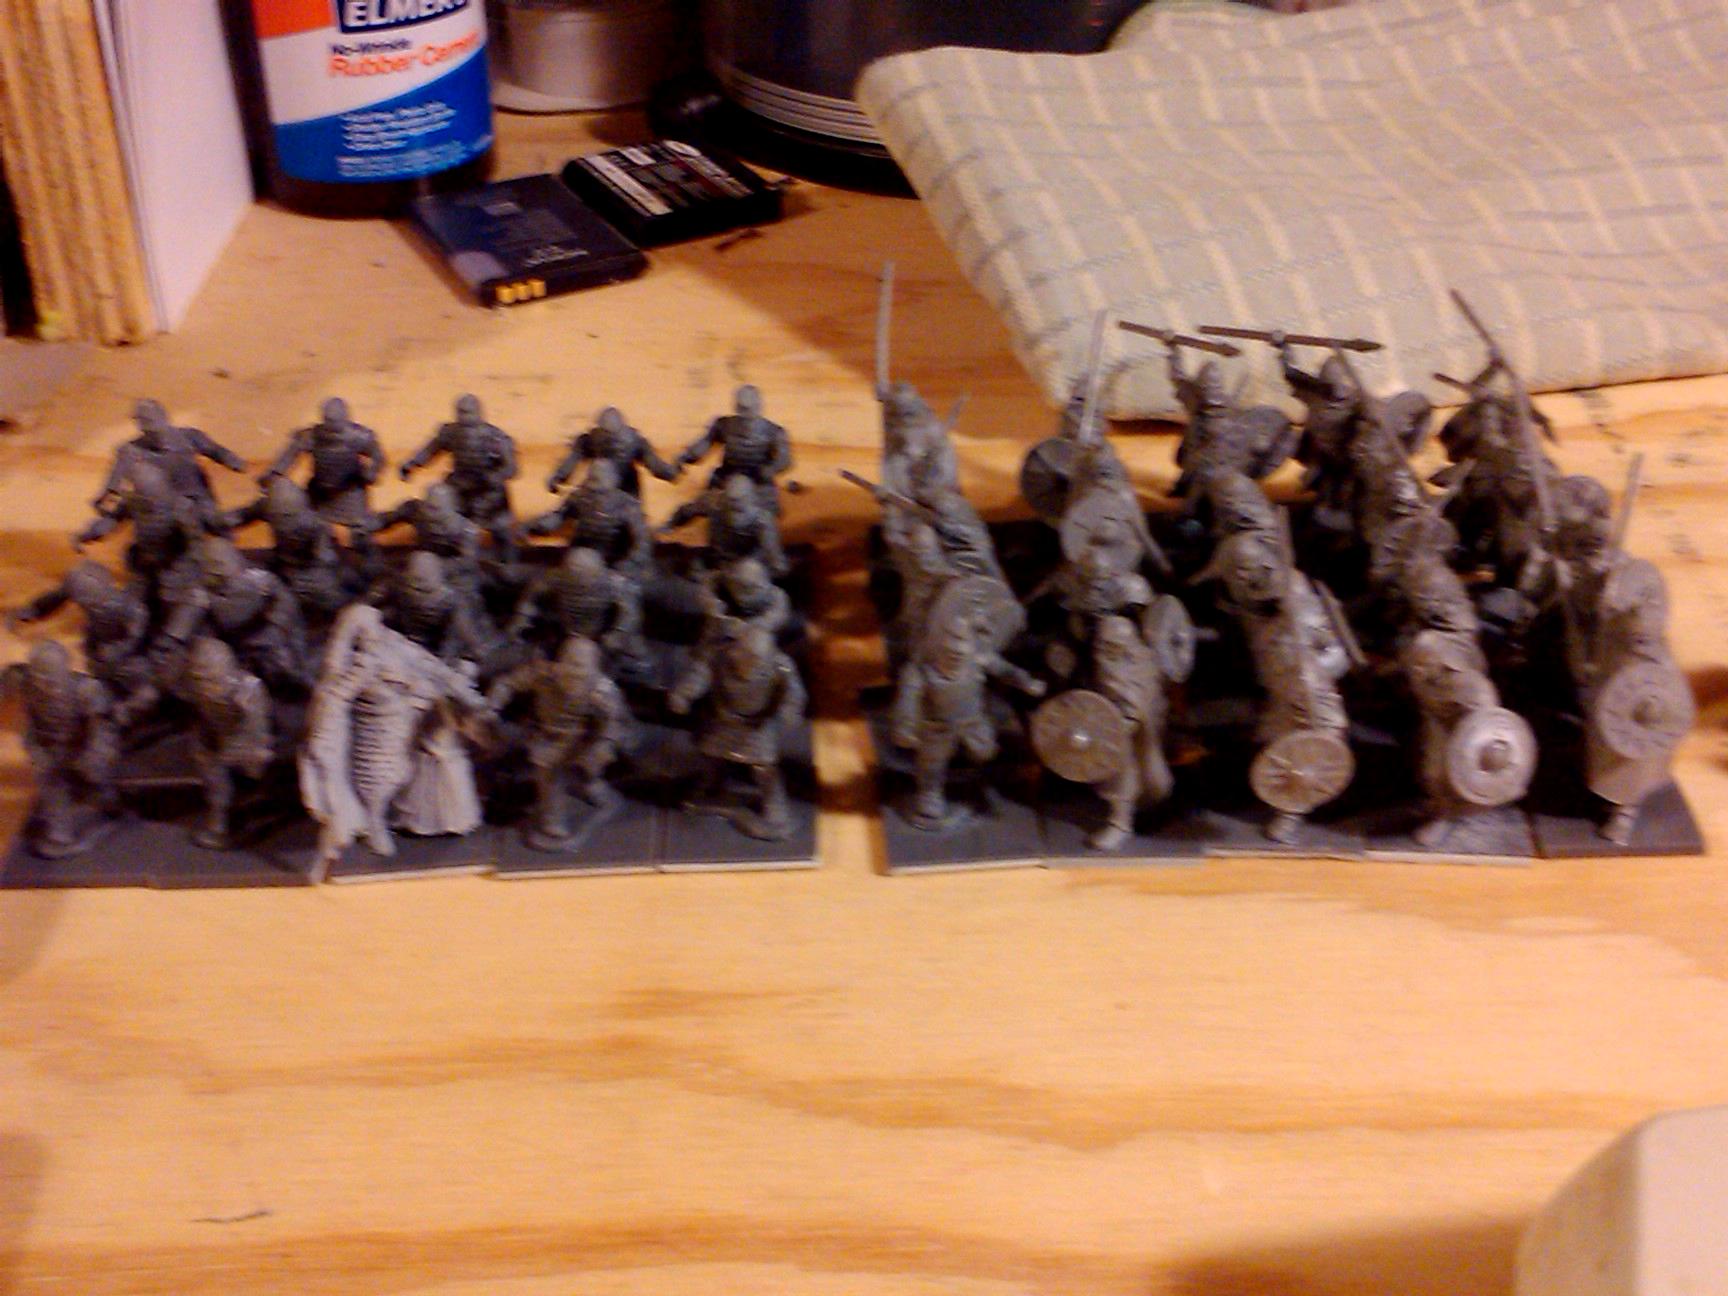 28mm, Army, Build, Cavalry, Ceorl, Fyrd, Germanic, Historical, Hobby, Huscarl, Infantry, Lord Of The Rings, Painting, Saxon, Thegn, Troops, Vikings, Warhammer Ancients